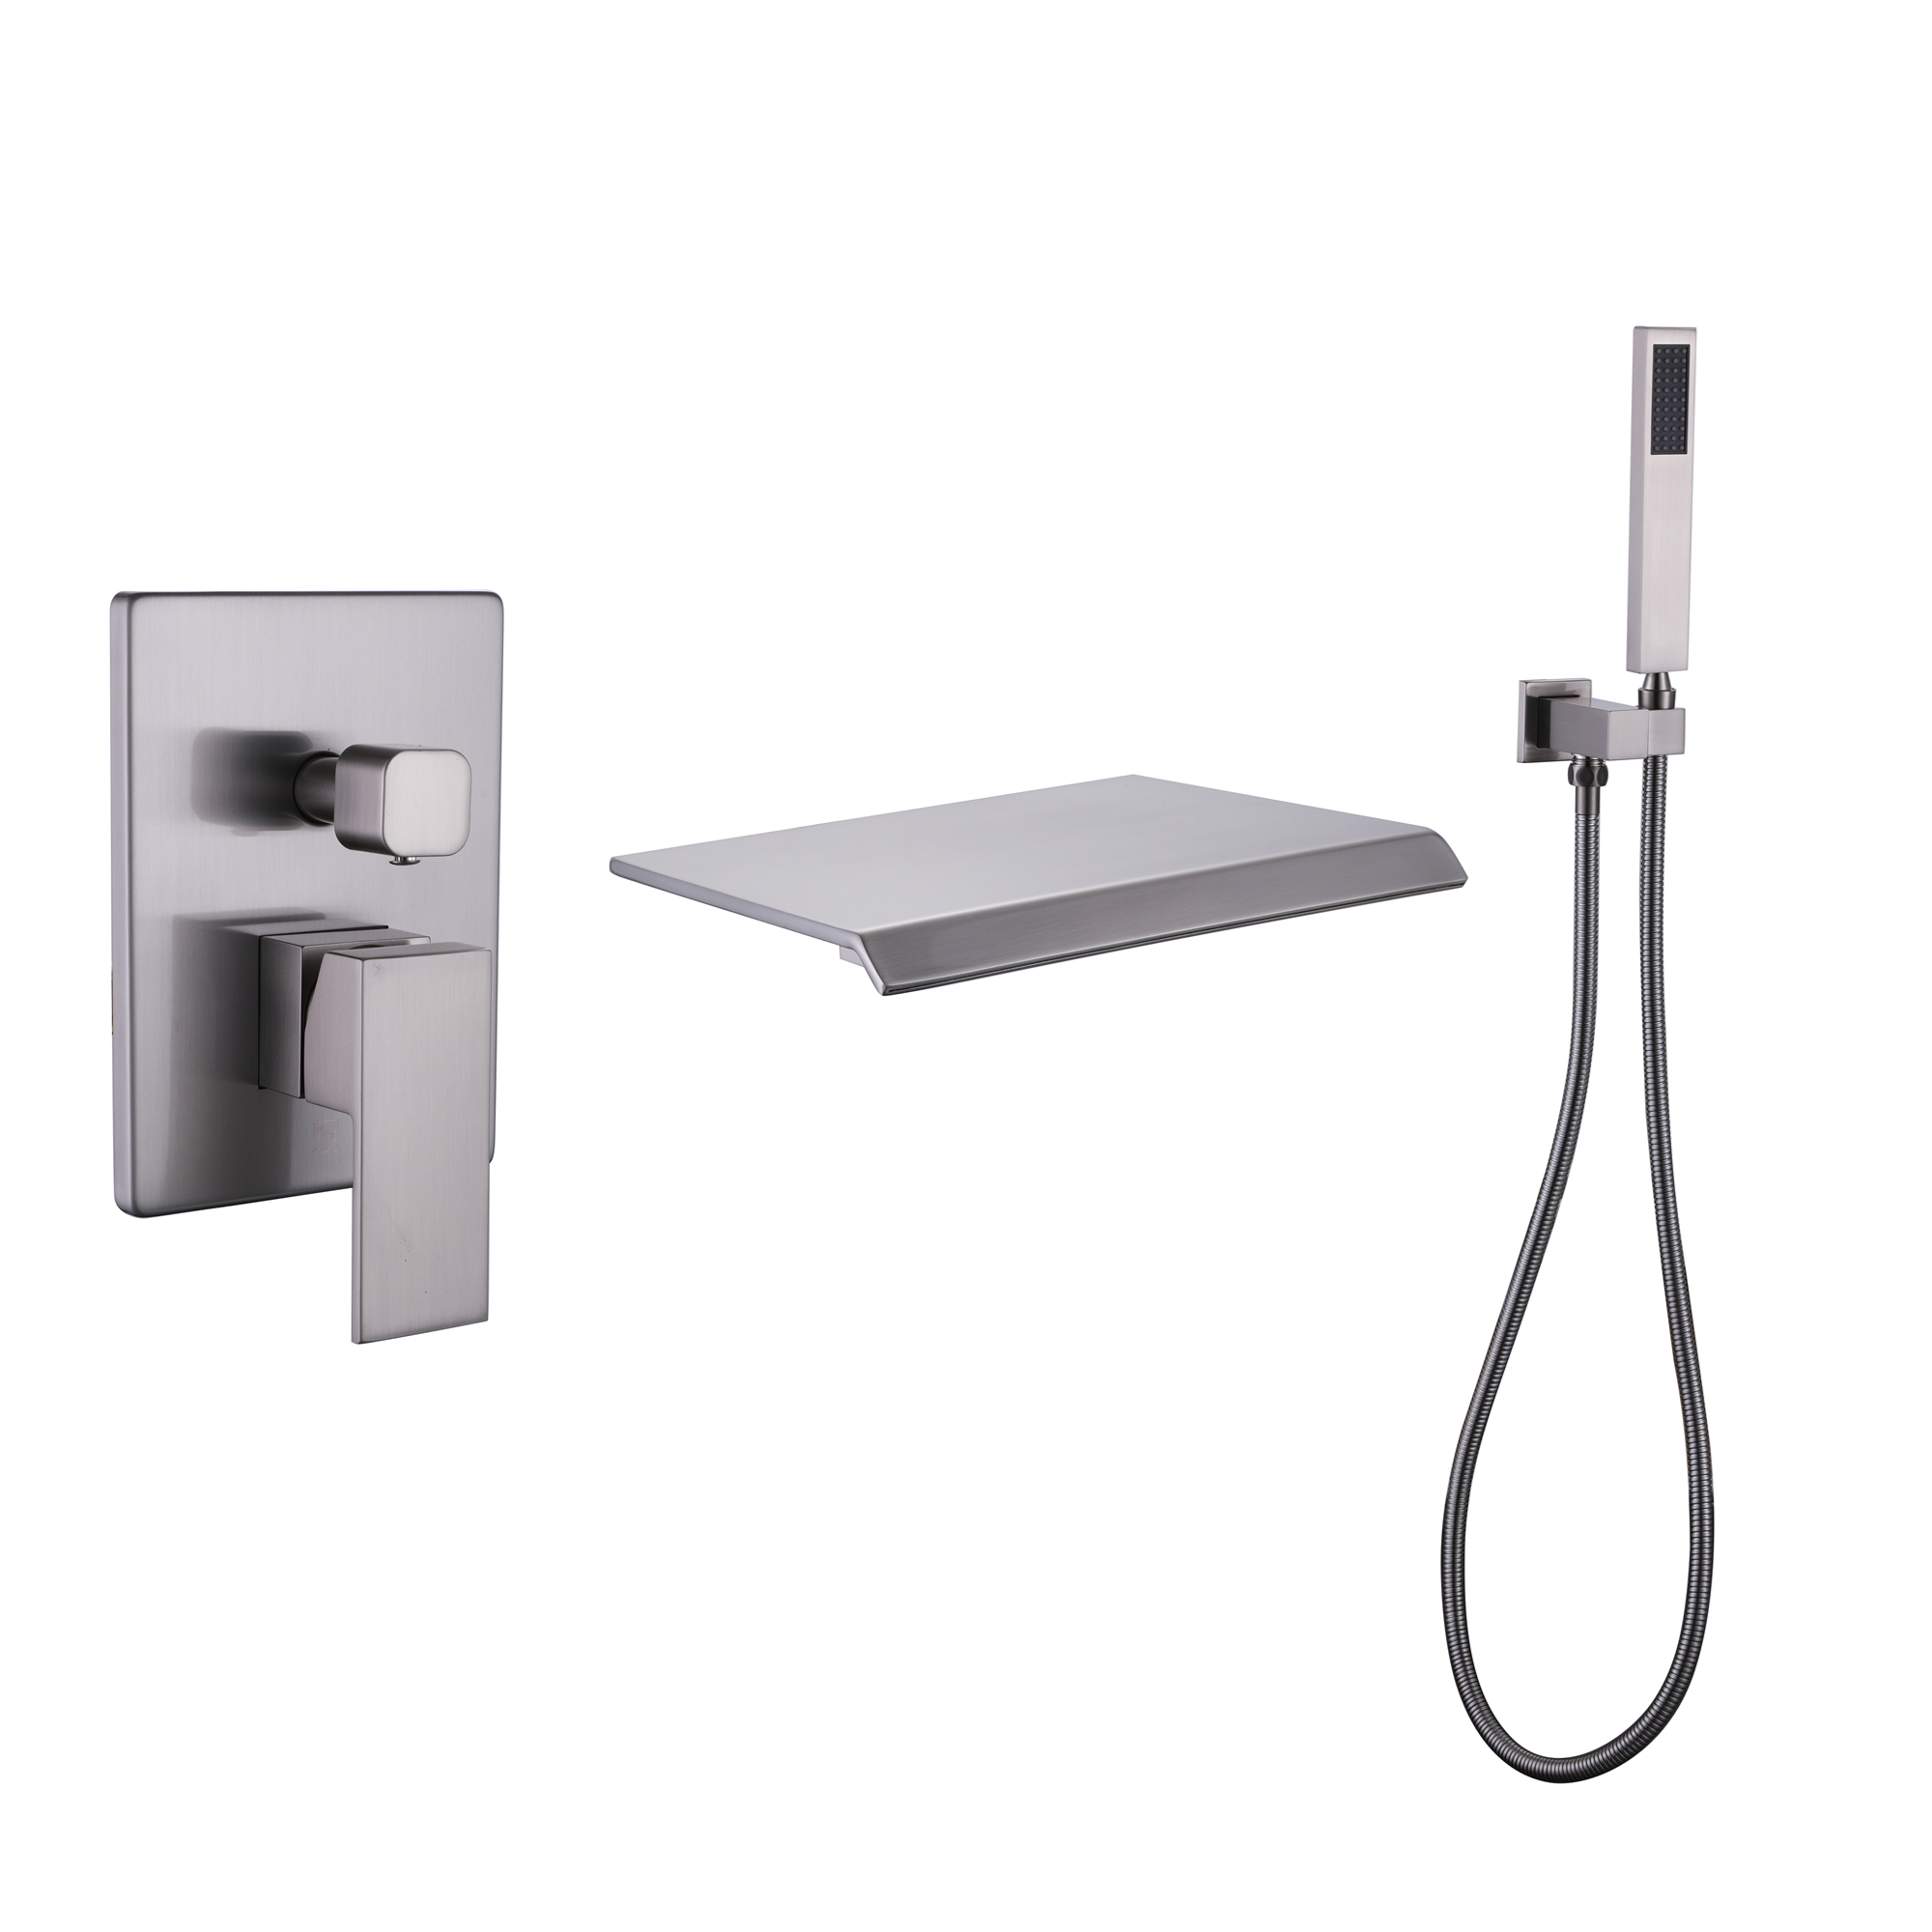 TrustMade Pressure-Balance Waterfall Single Handle Wall Mount Tub Faucet with Hand Shower, Brushed Nickel - 2W02-CASAINC